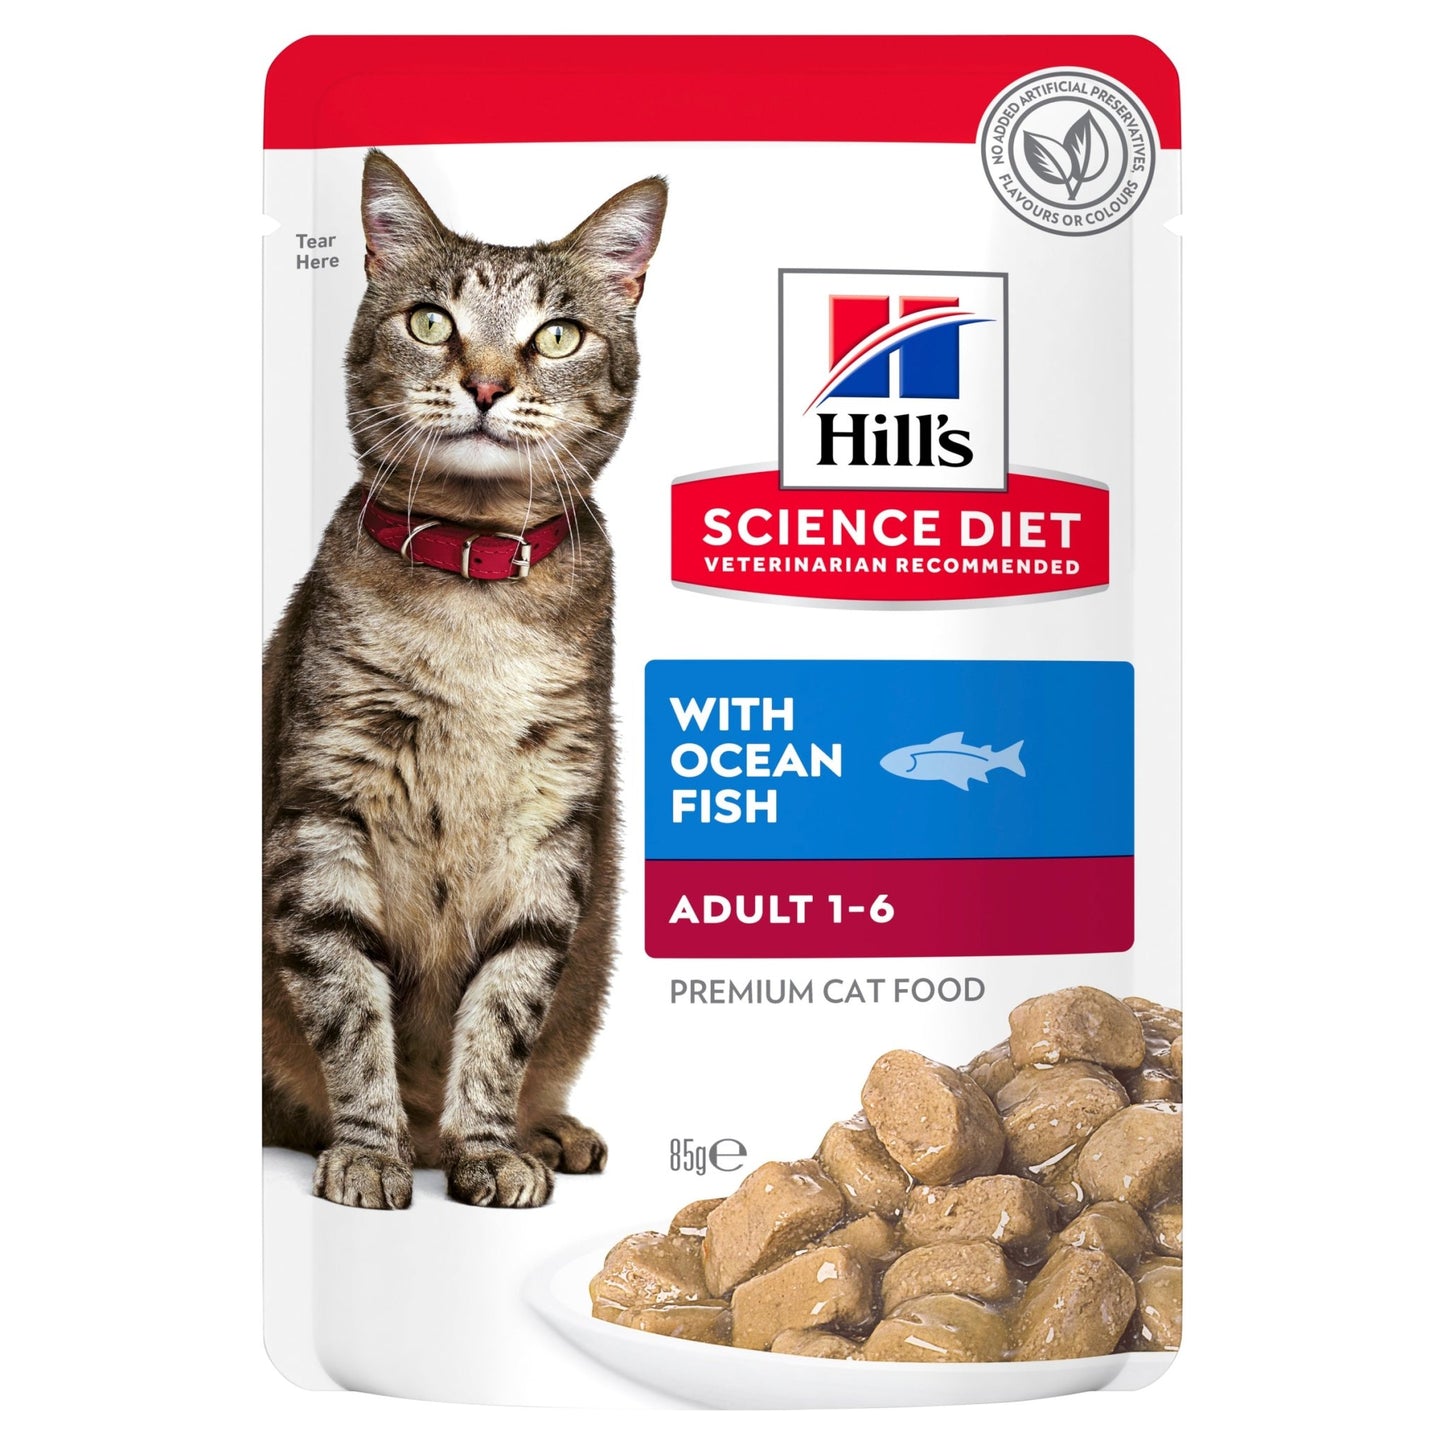 Hill's Science Diet Adult Optimal Care Ocean Fish Cat Food pouches 12x85g - Woonona Petfood & Produce